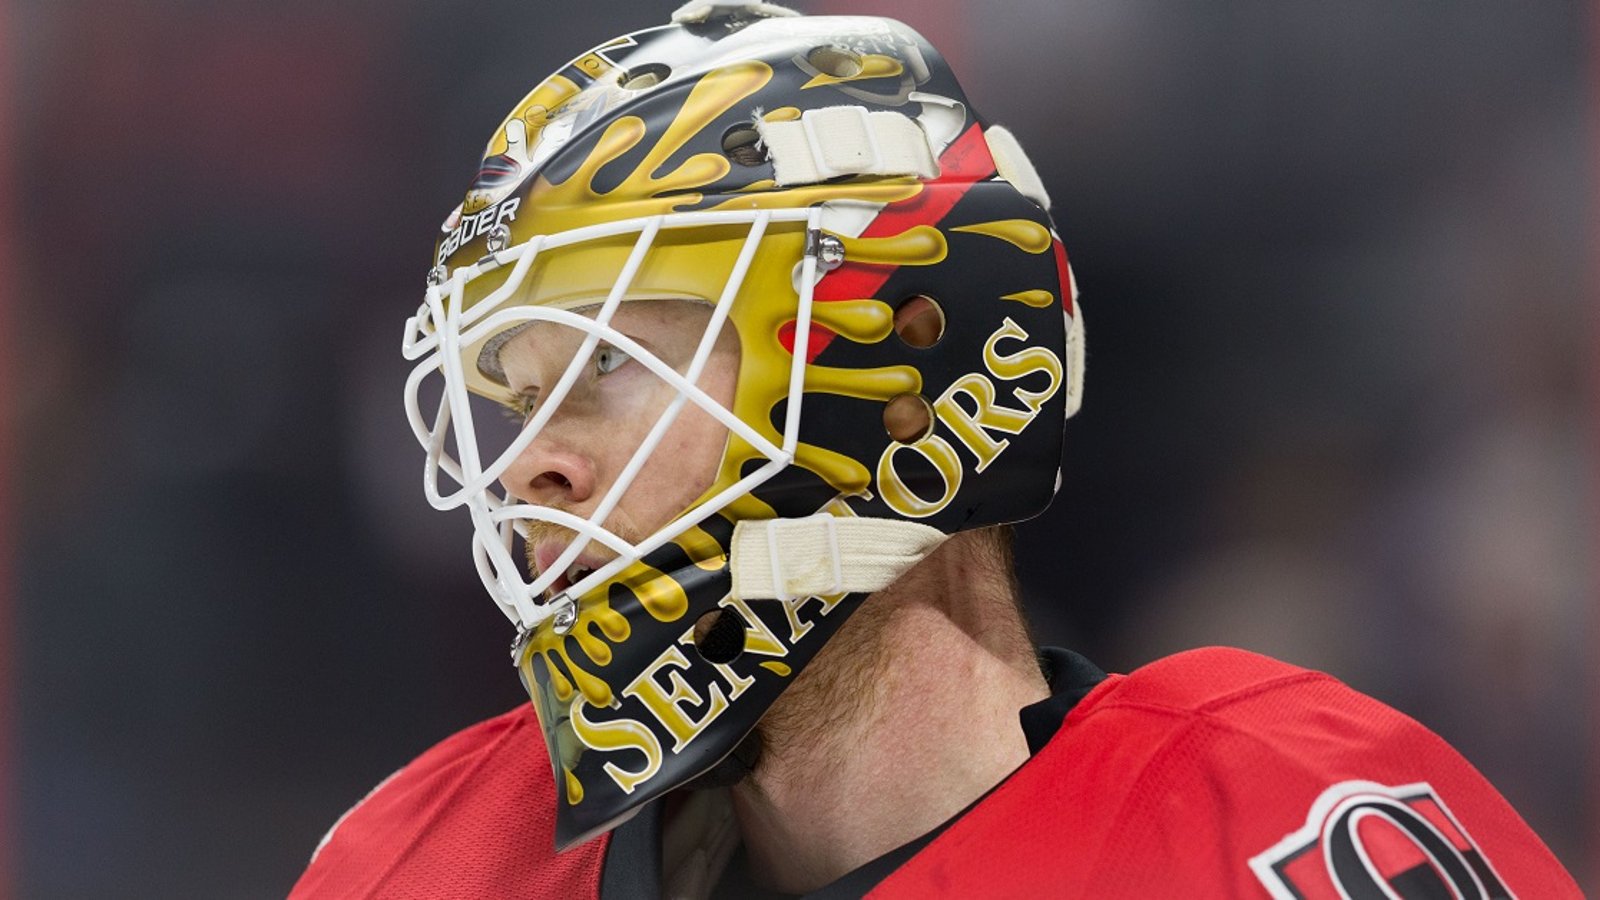 NHL goalie making his 8th straight start fter being waived by two teams this season.